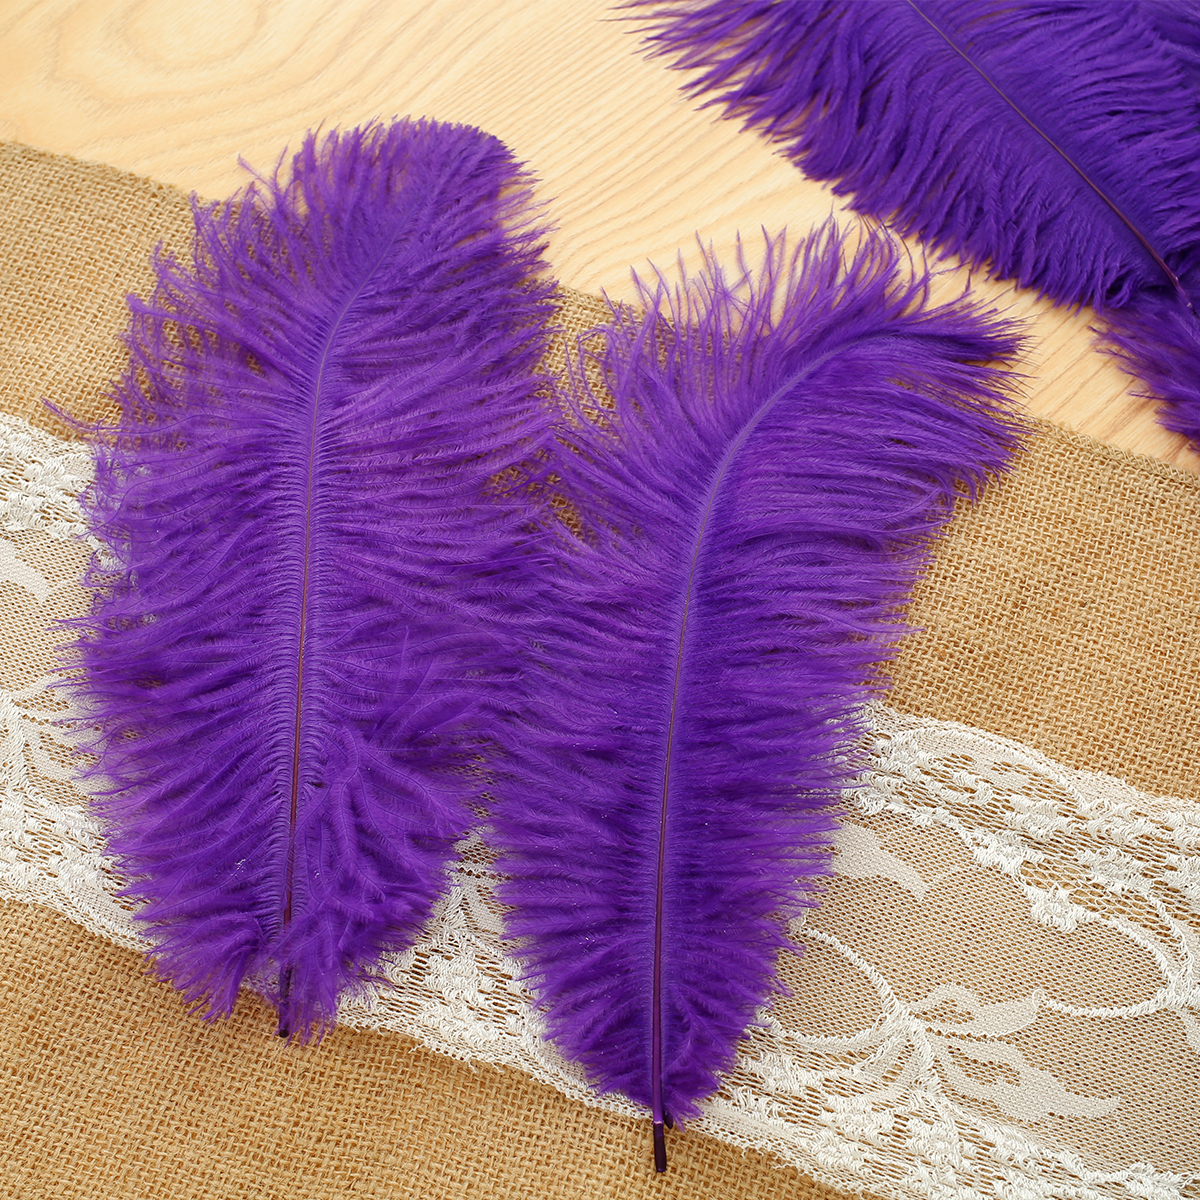 Pluokvzr 10Pcs Ostrich Feather Multi-Color Ostrich Feather Plume Decorative  Pink Gold Purple Feather Craft Fashion DIY Large Feat 